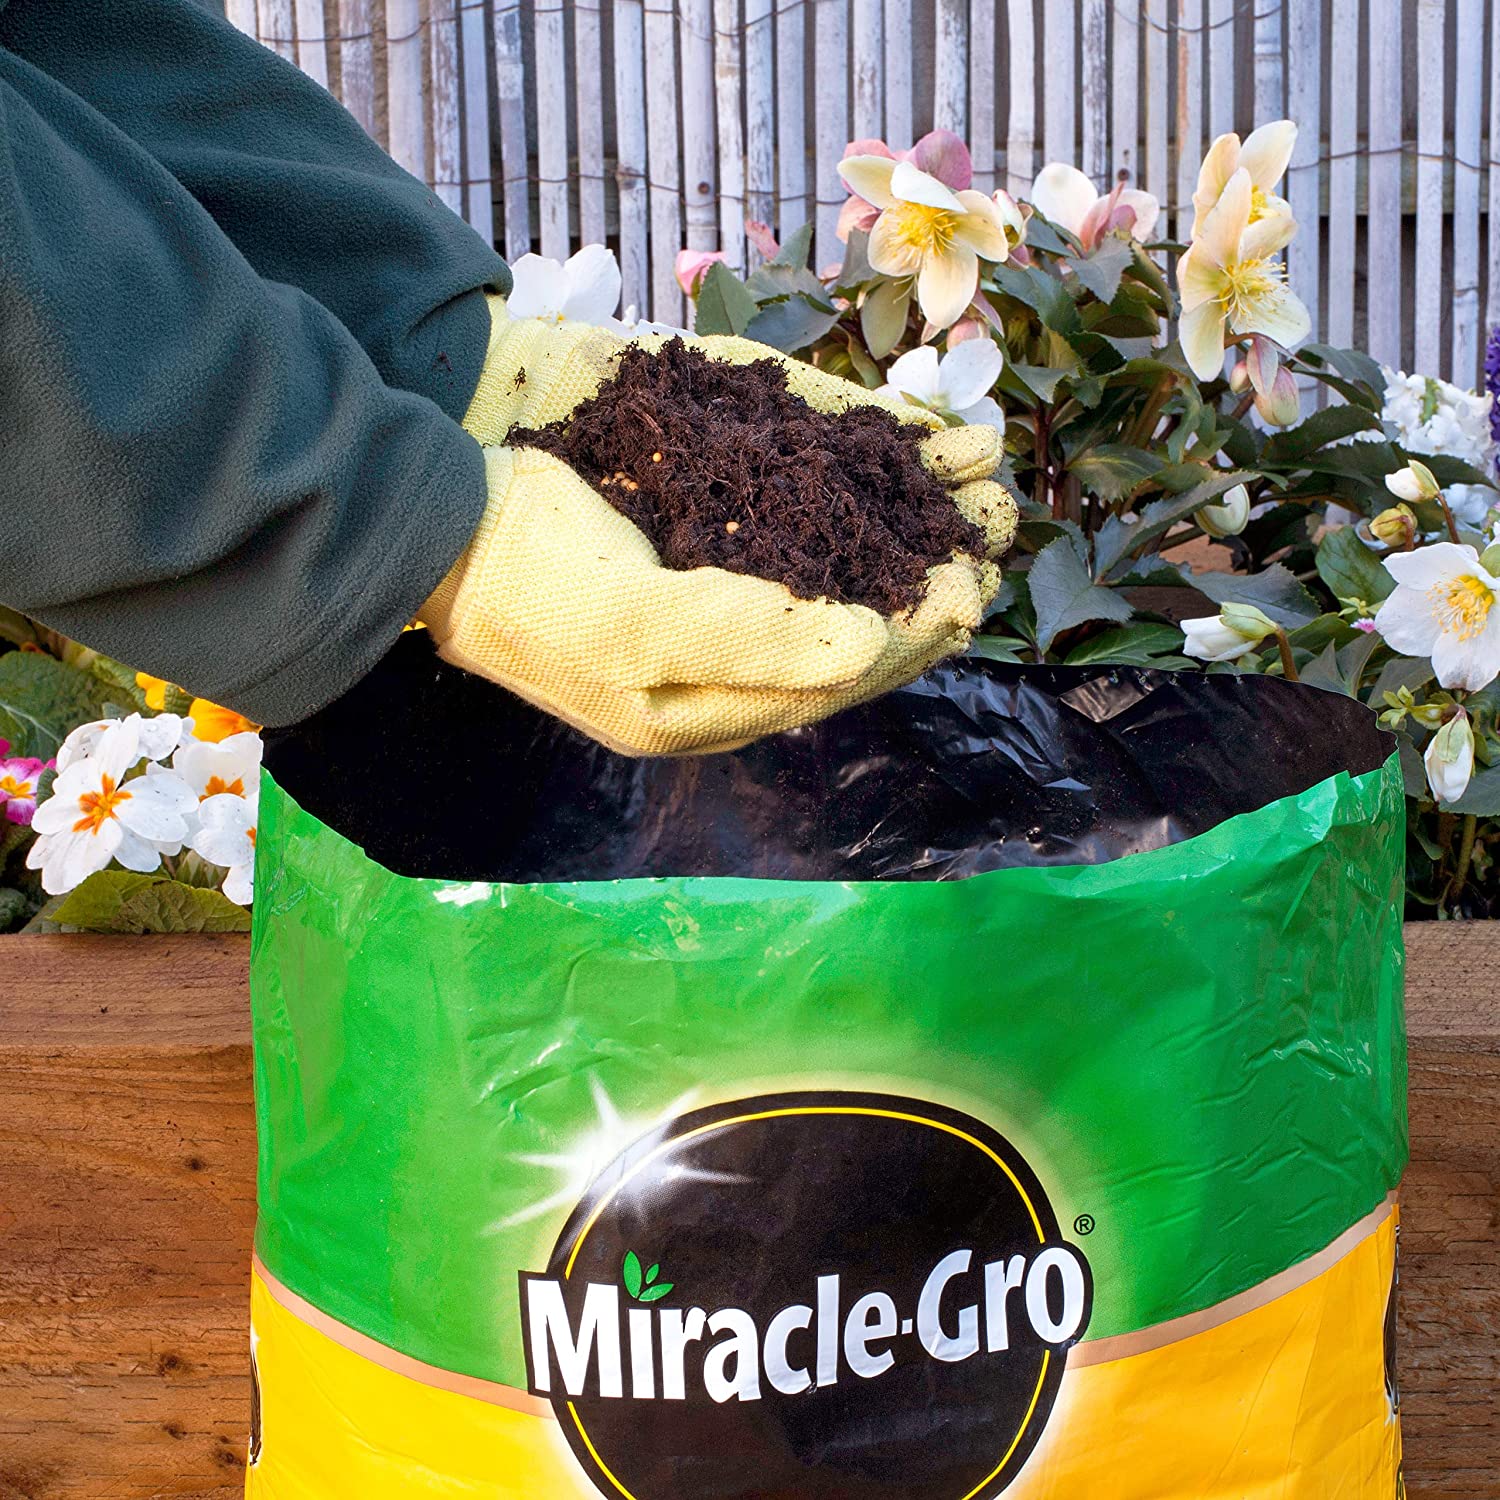 Miracle-Gro All Purpose Compost